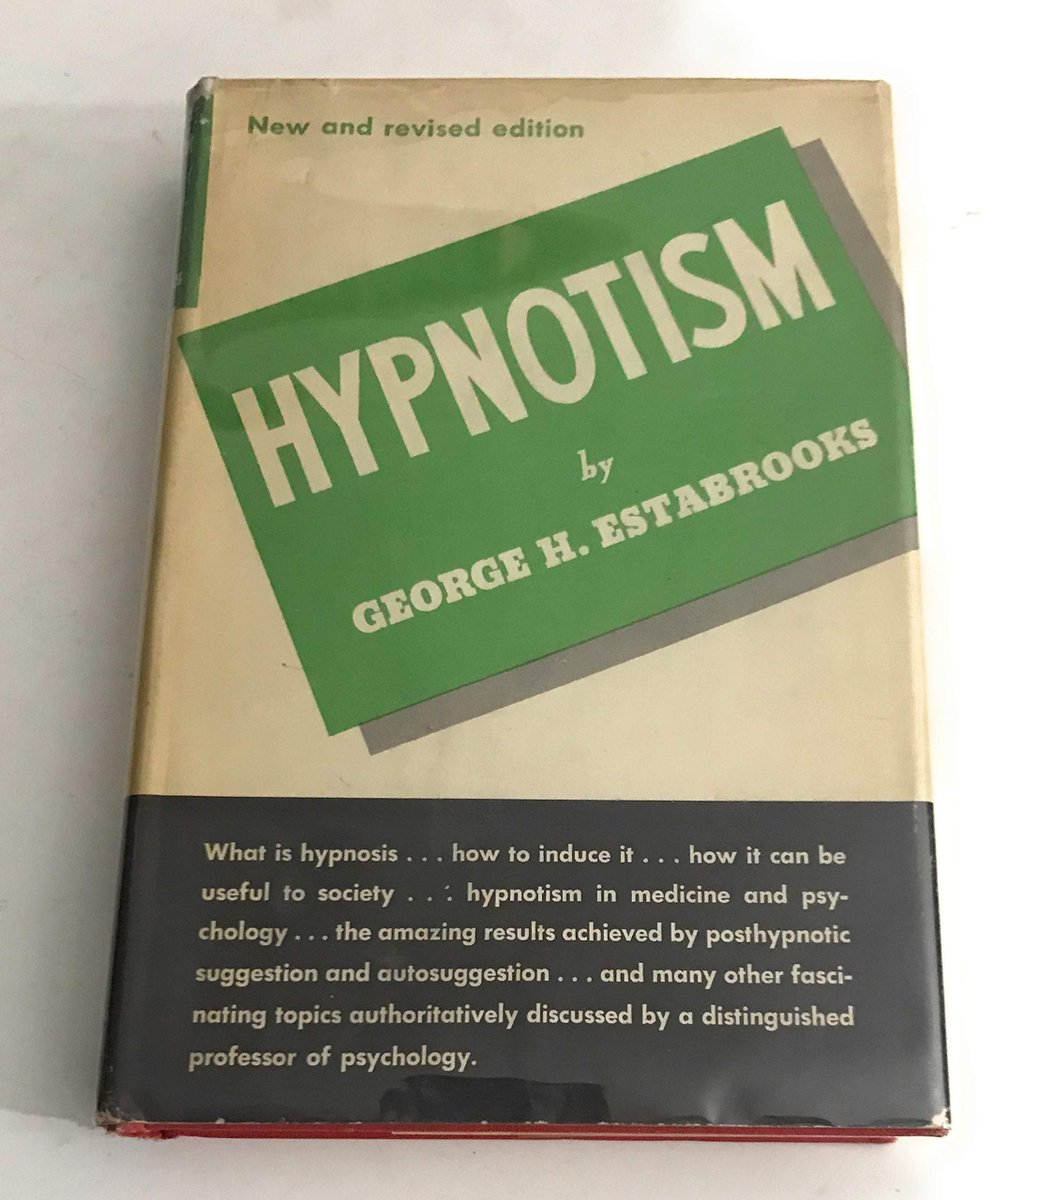 George Estabrooks, psychologist (and Rhodes Scholar ;) ) was hired by the Department of War during WWII to research the use of hypnosis during warfare. the OSS was pursuing research along these lines at the time as well